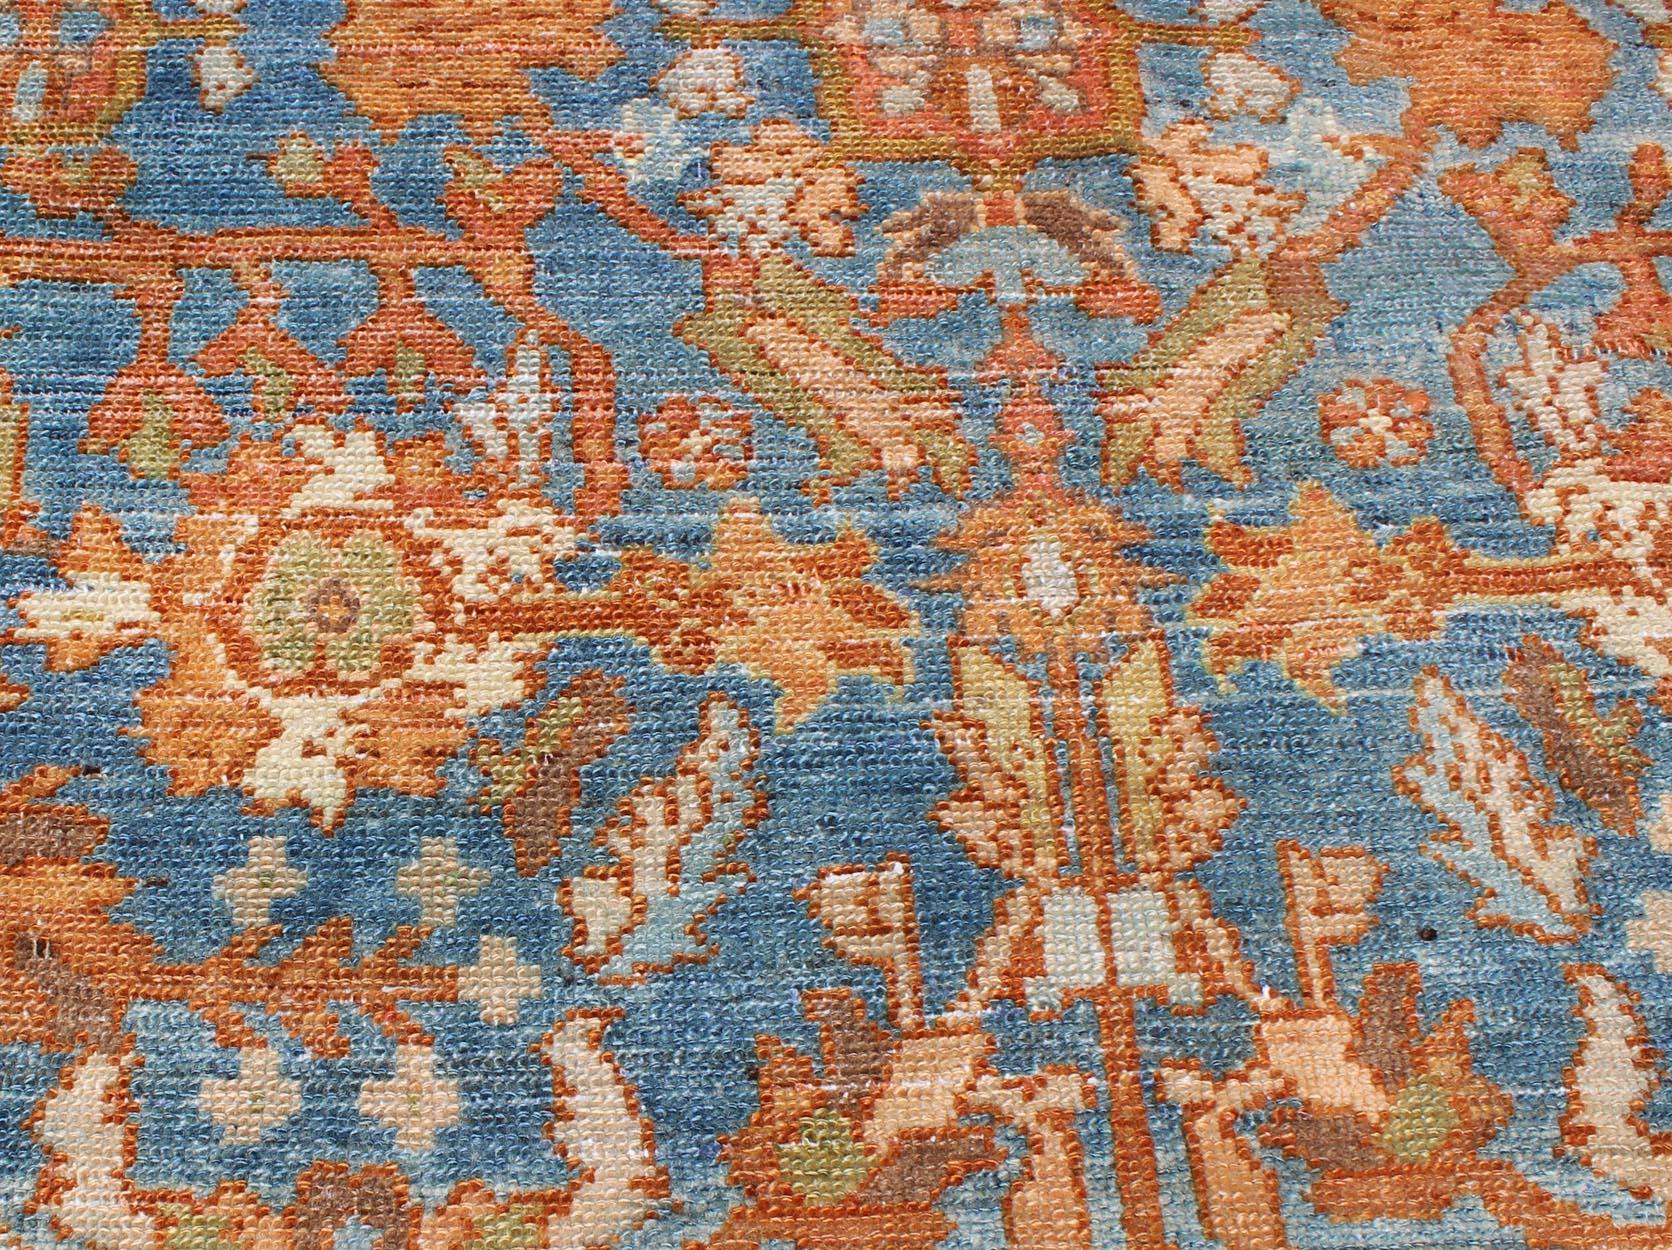 Vibrant Antique Persian Malayer Rug in Shades of Rust, Orange, and Blue For Sale 2